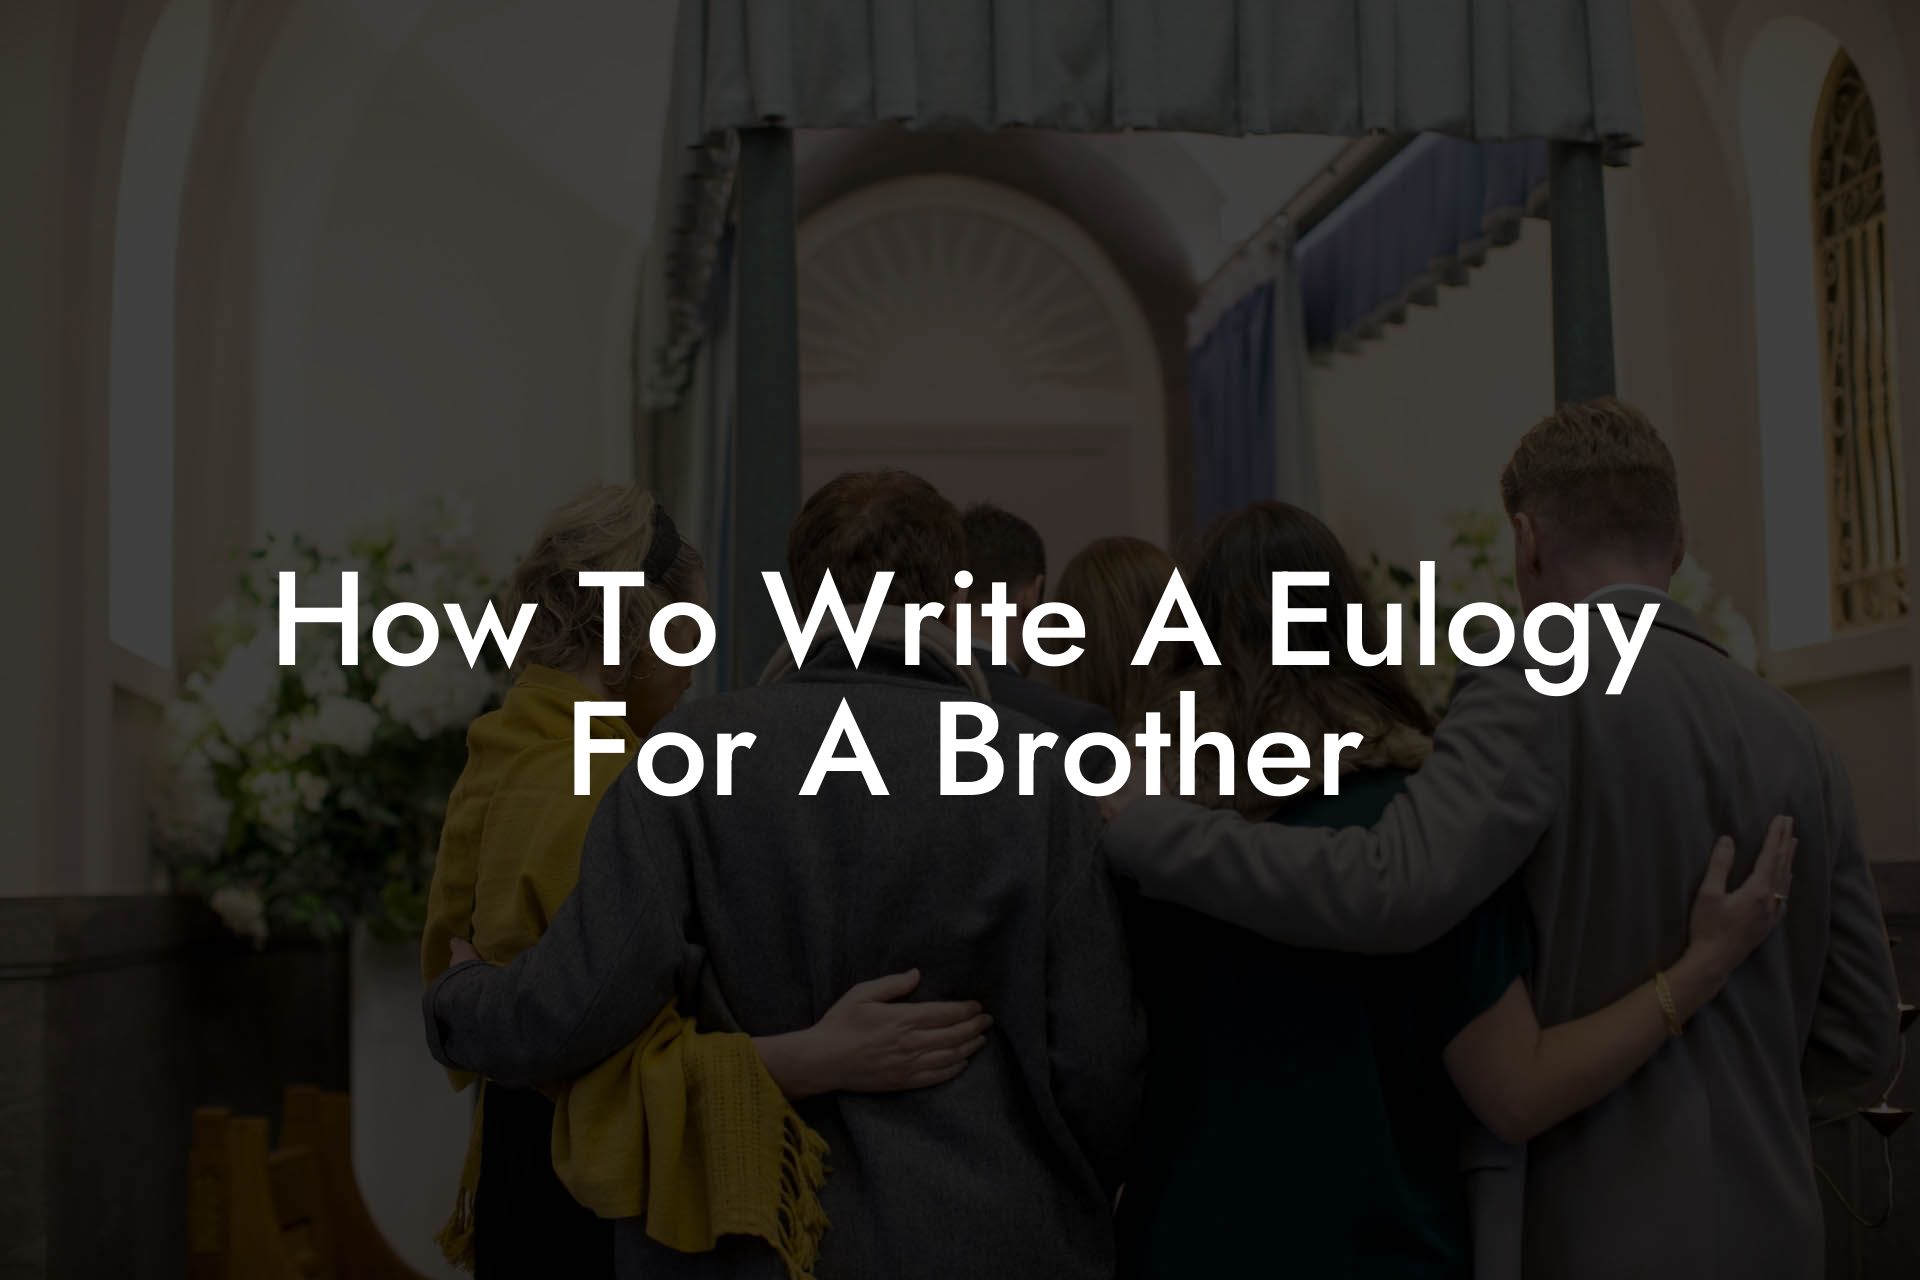 How To Write A Eulogy For A Brother?